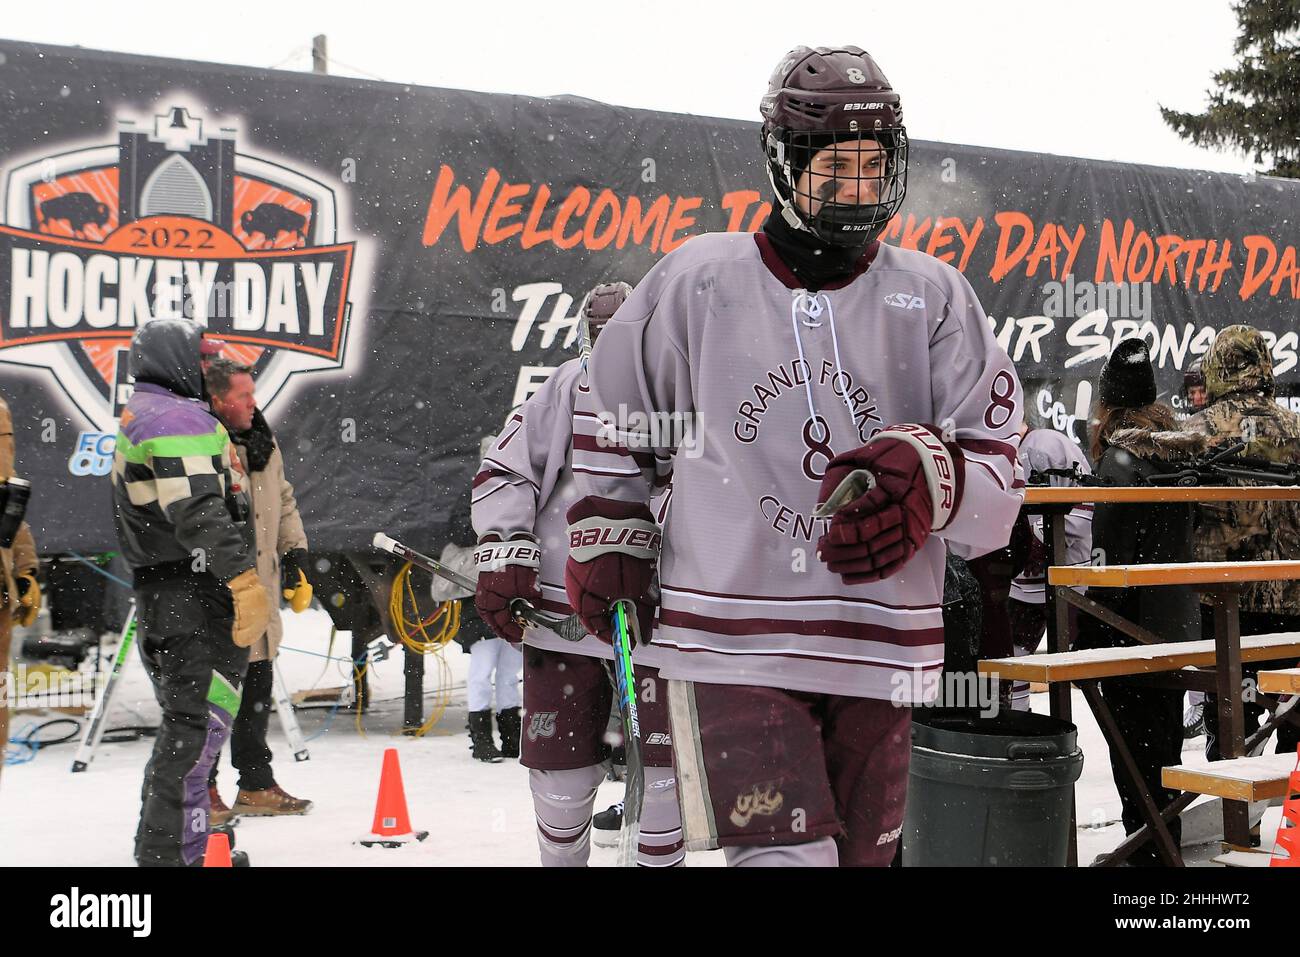 Grand Forks Central Knights skater Cade Lindseth (8) heads to the ice during the 3rd annual Hockey Day North Dakota outdoor hockey event in Jamestown, ND. Youth, high school and college hockey teams from around North Dakota competed over two days. By Russell Hons/CSM Stock Photo